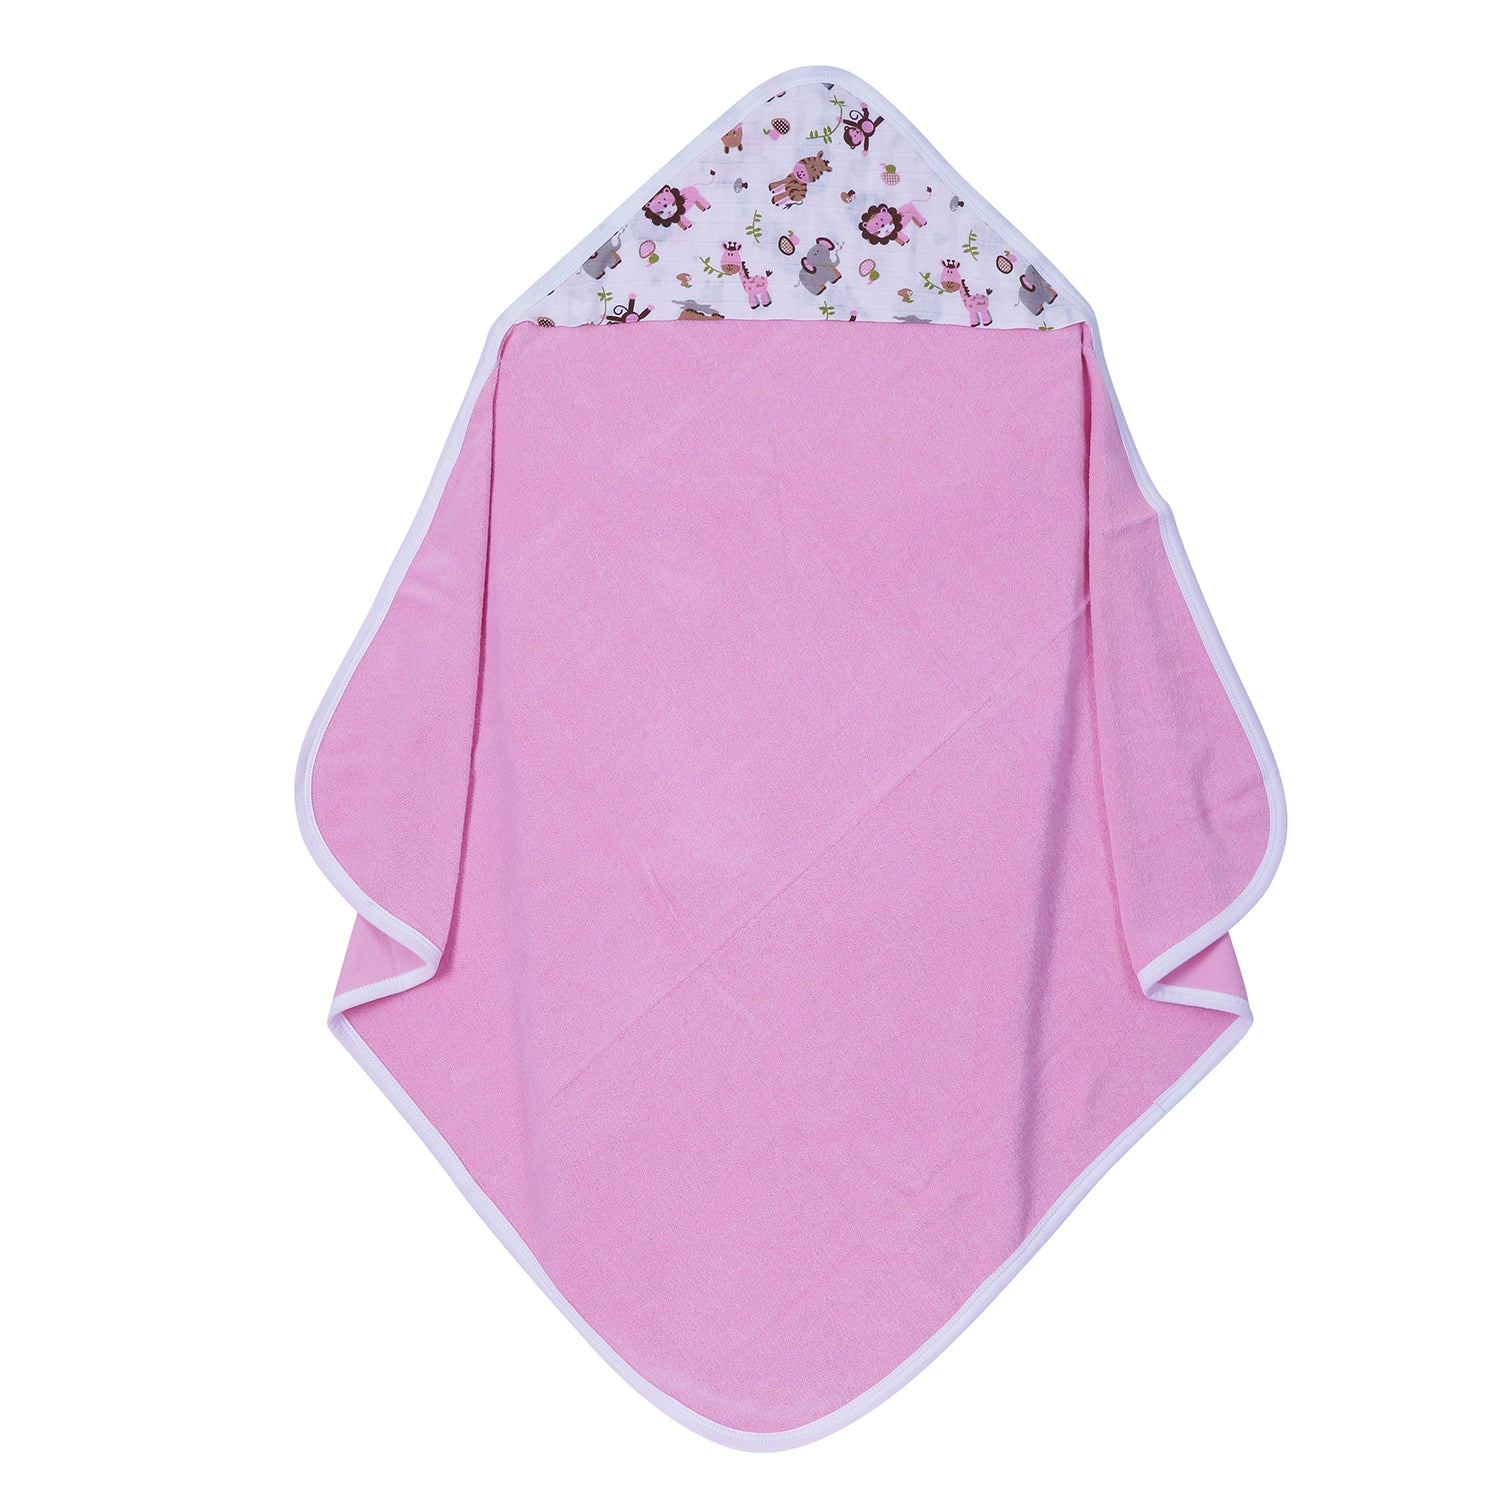 My Milestones 100% Premium Cotton Single Layered Terry Hooded Baby / Toddlers Bath Towel - Pink Solid